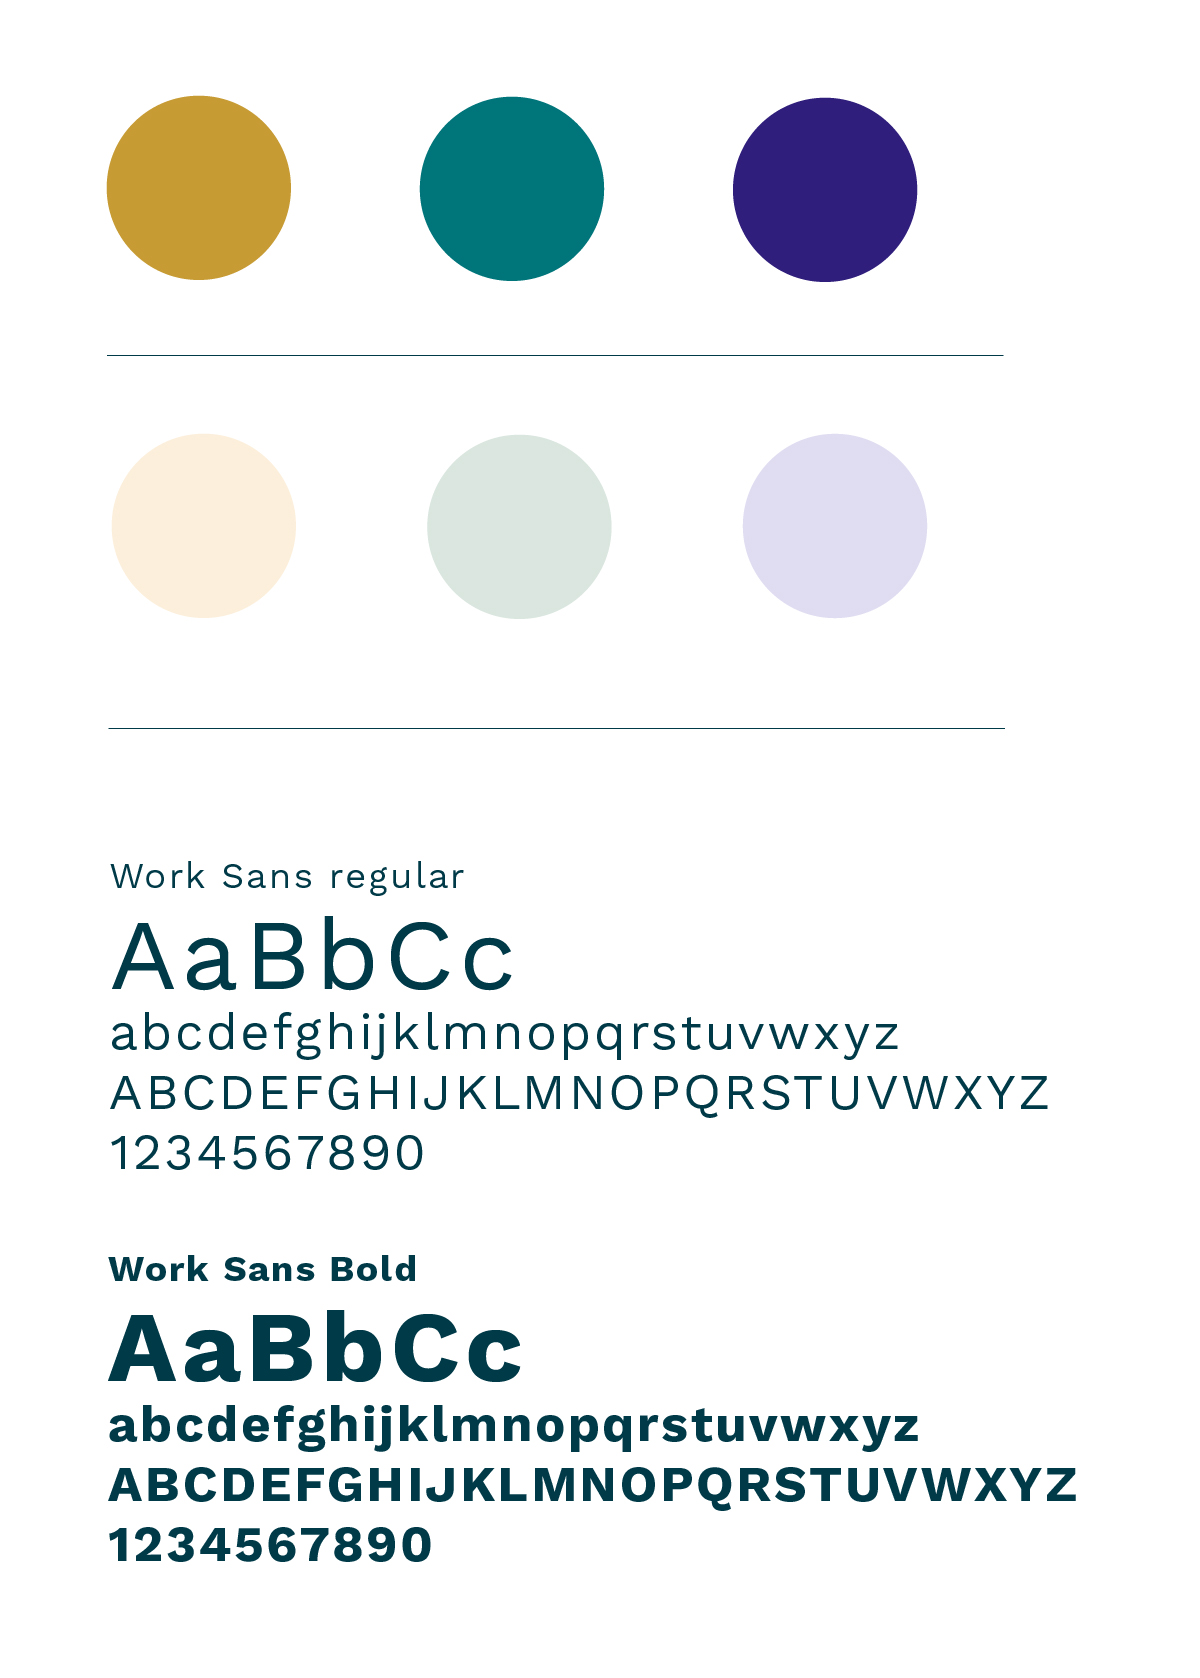 charte typo couleurs reboost